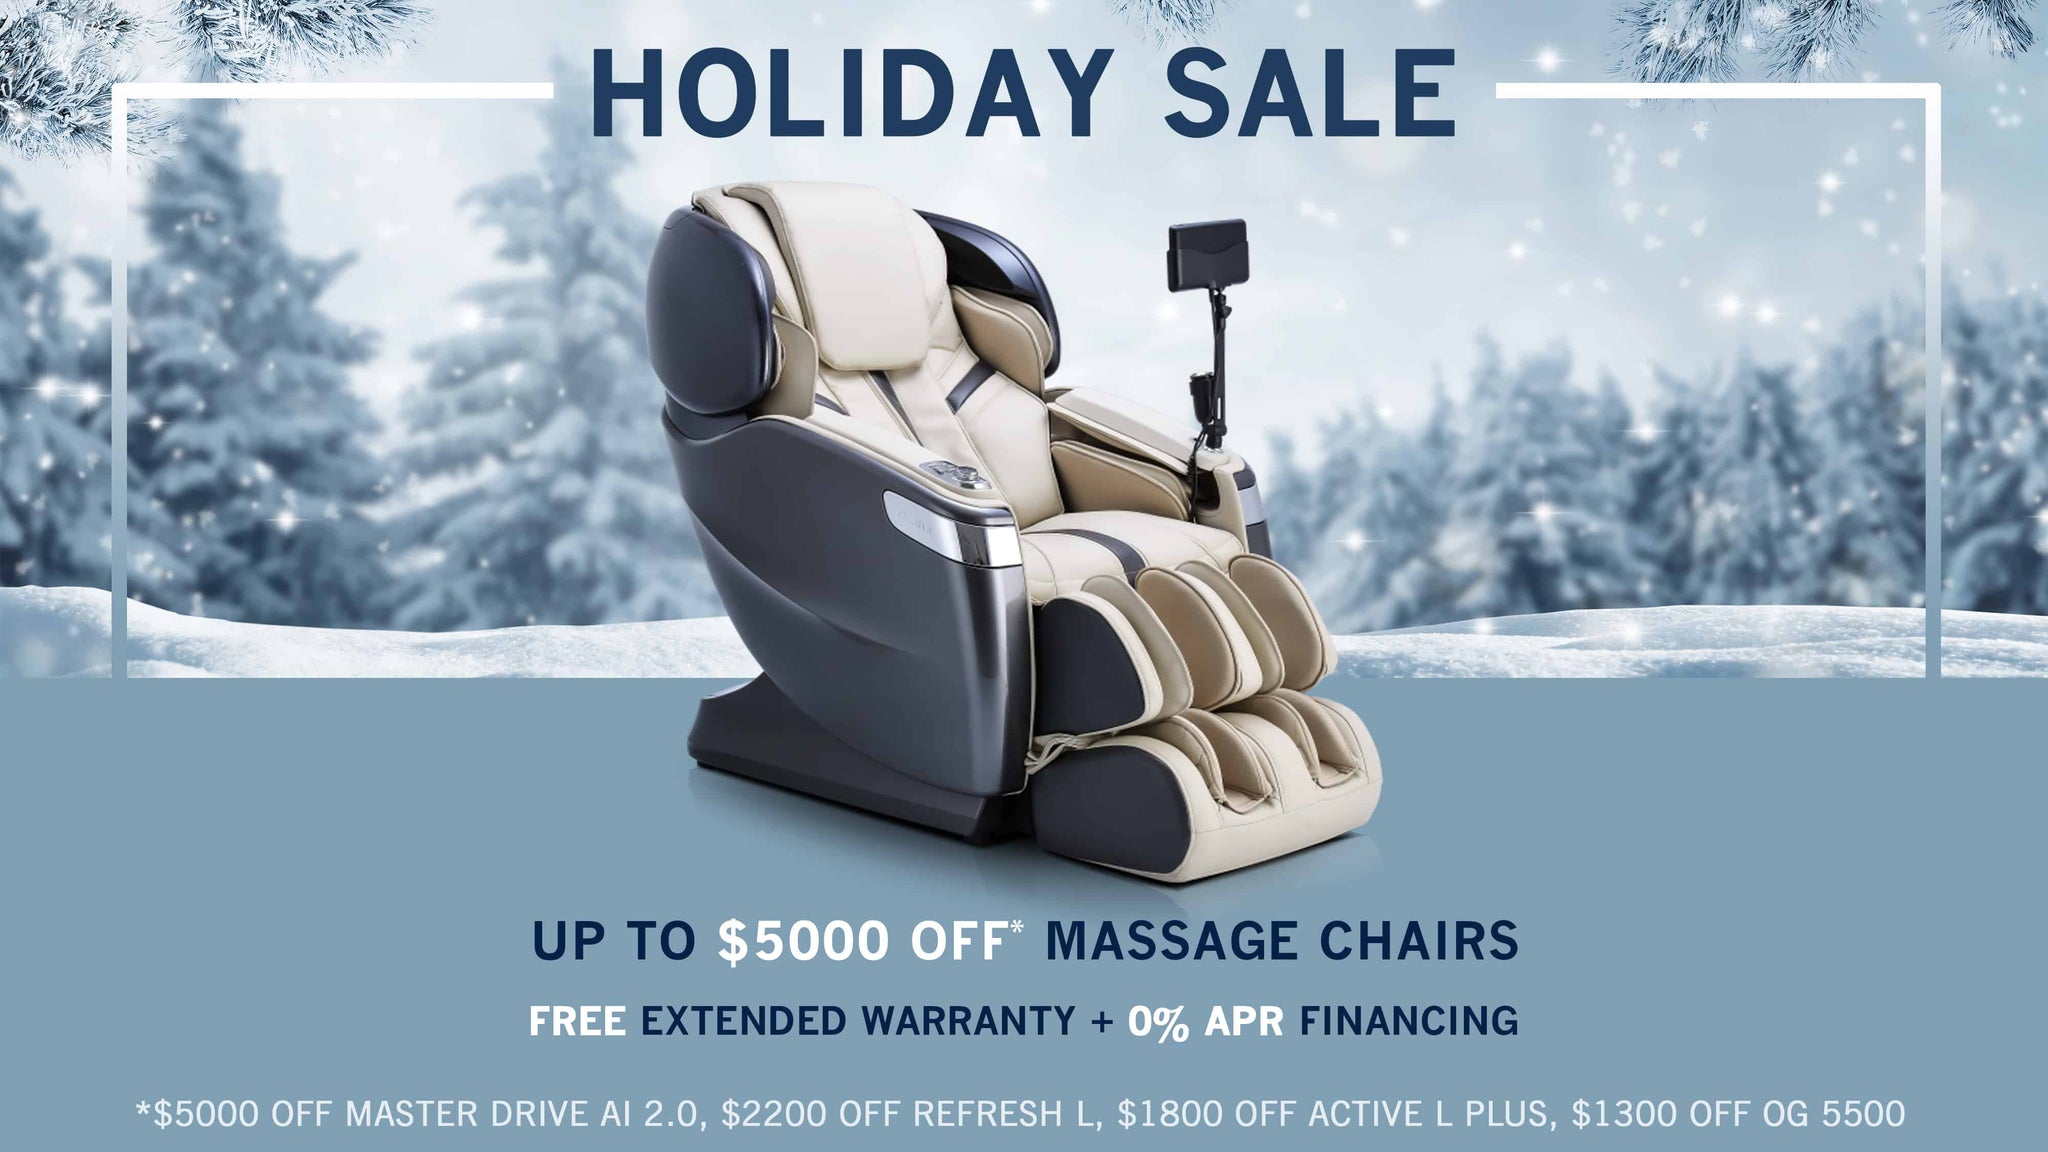 Holiday Sale - Up to $5000 Off on Ogawa Massage Chairs Plus a Free Extended Warranty